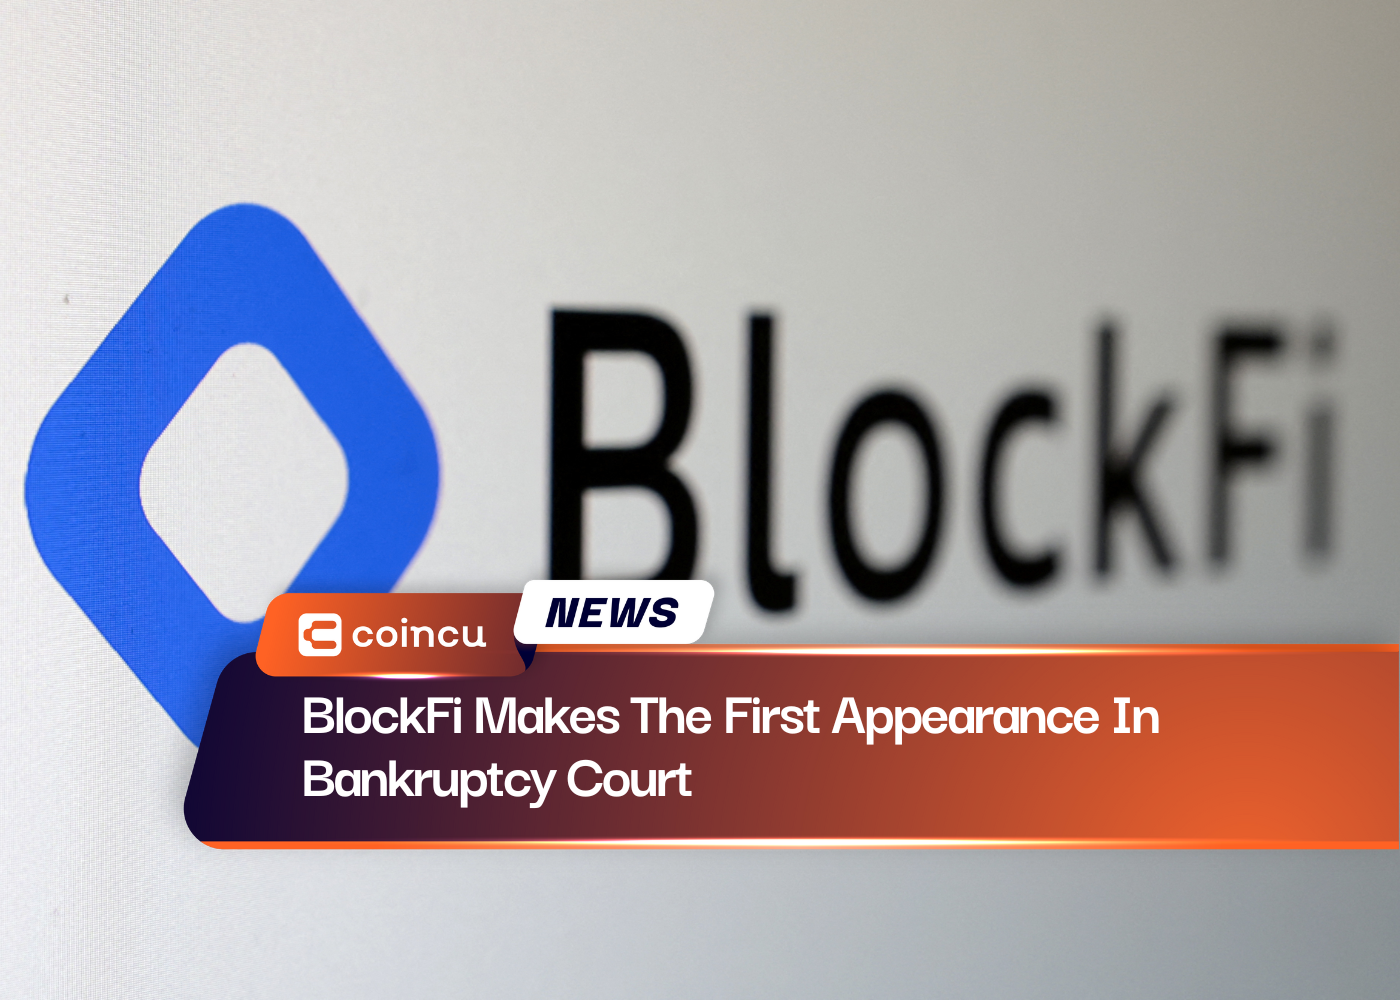 BlockFi Makes The First Appearance In Bankruptcy Court